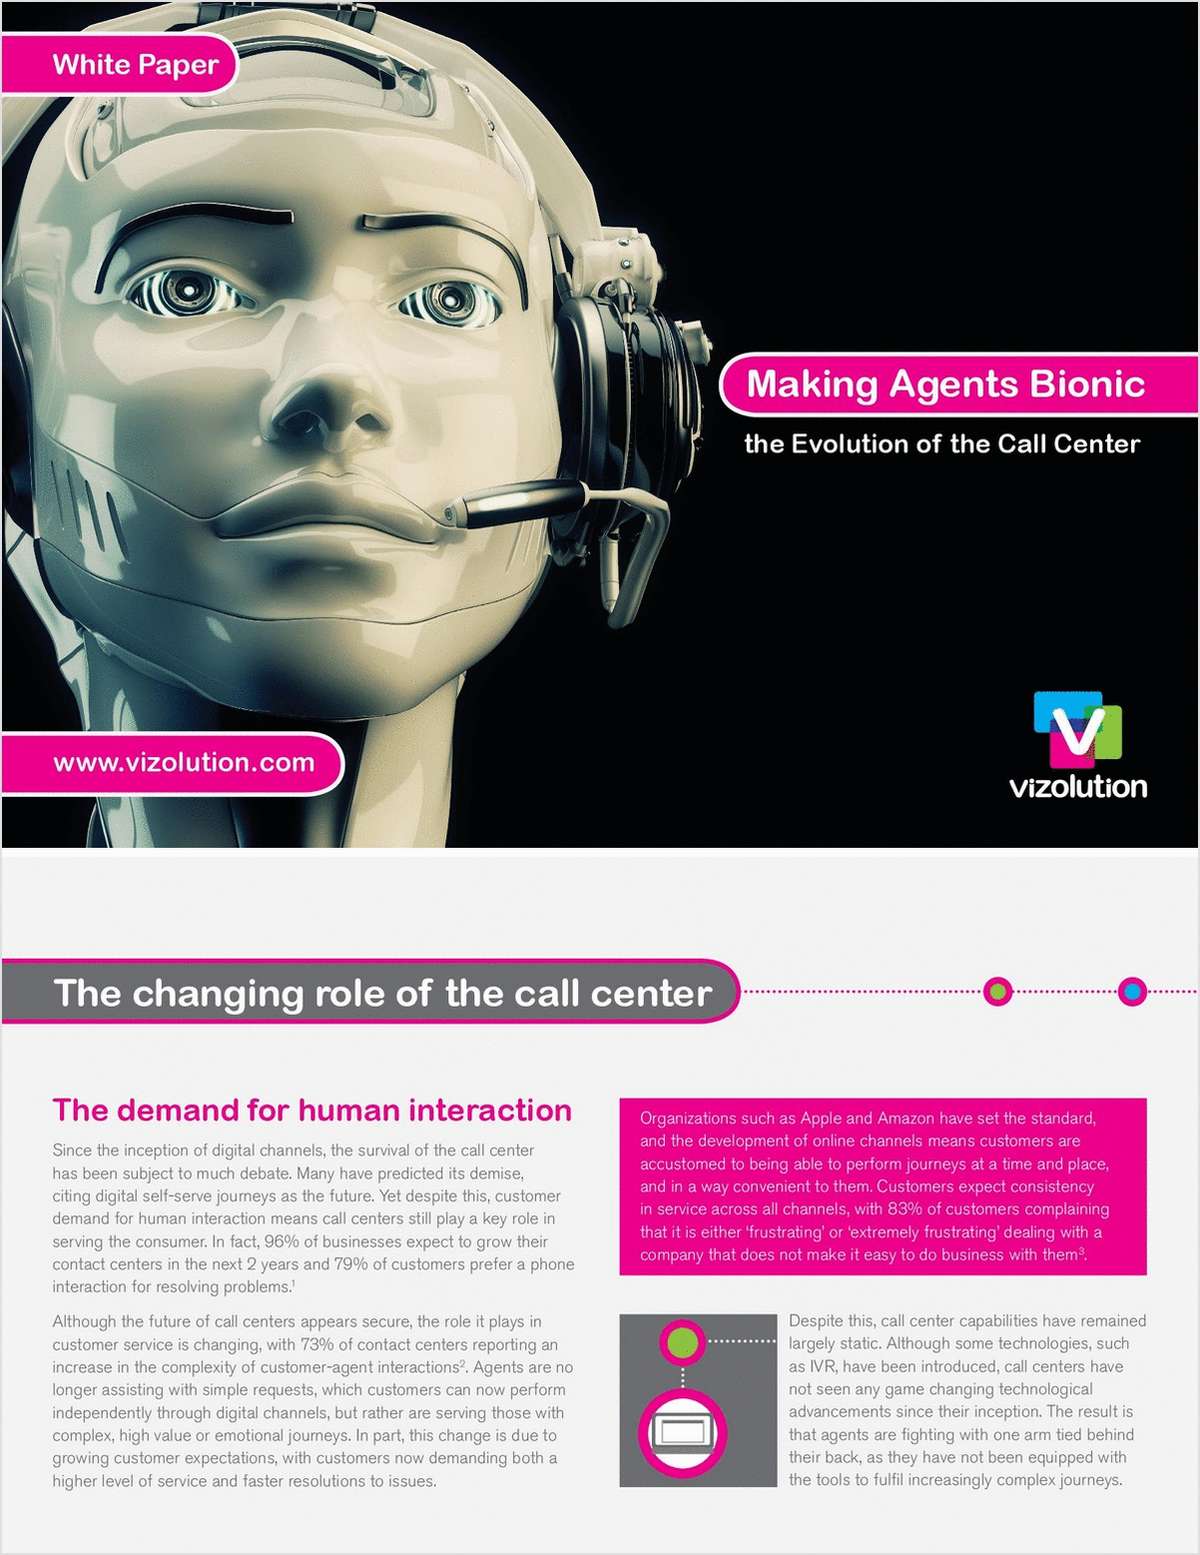 Making Agents Bionic: The Evolution of the Call Center- North America